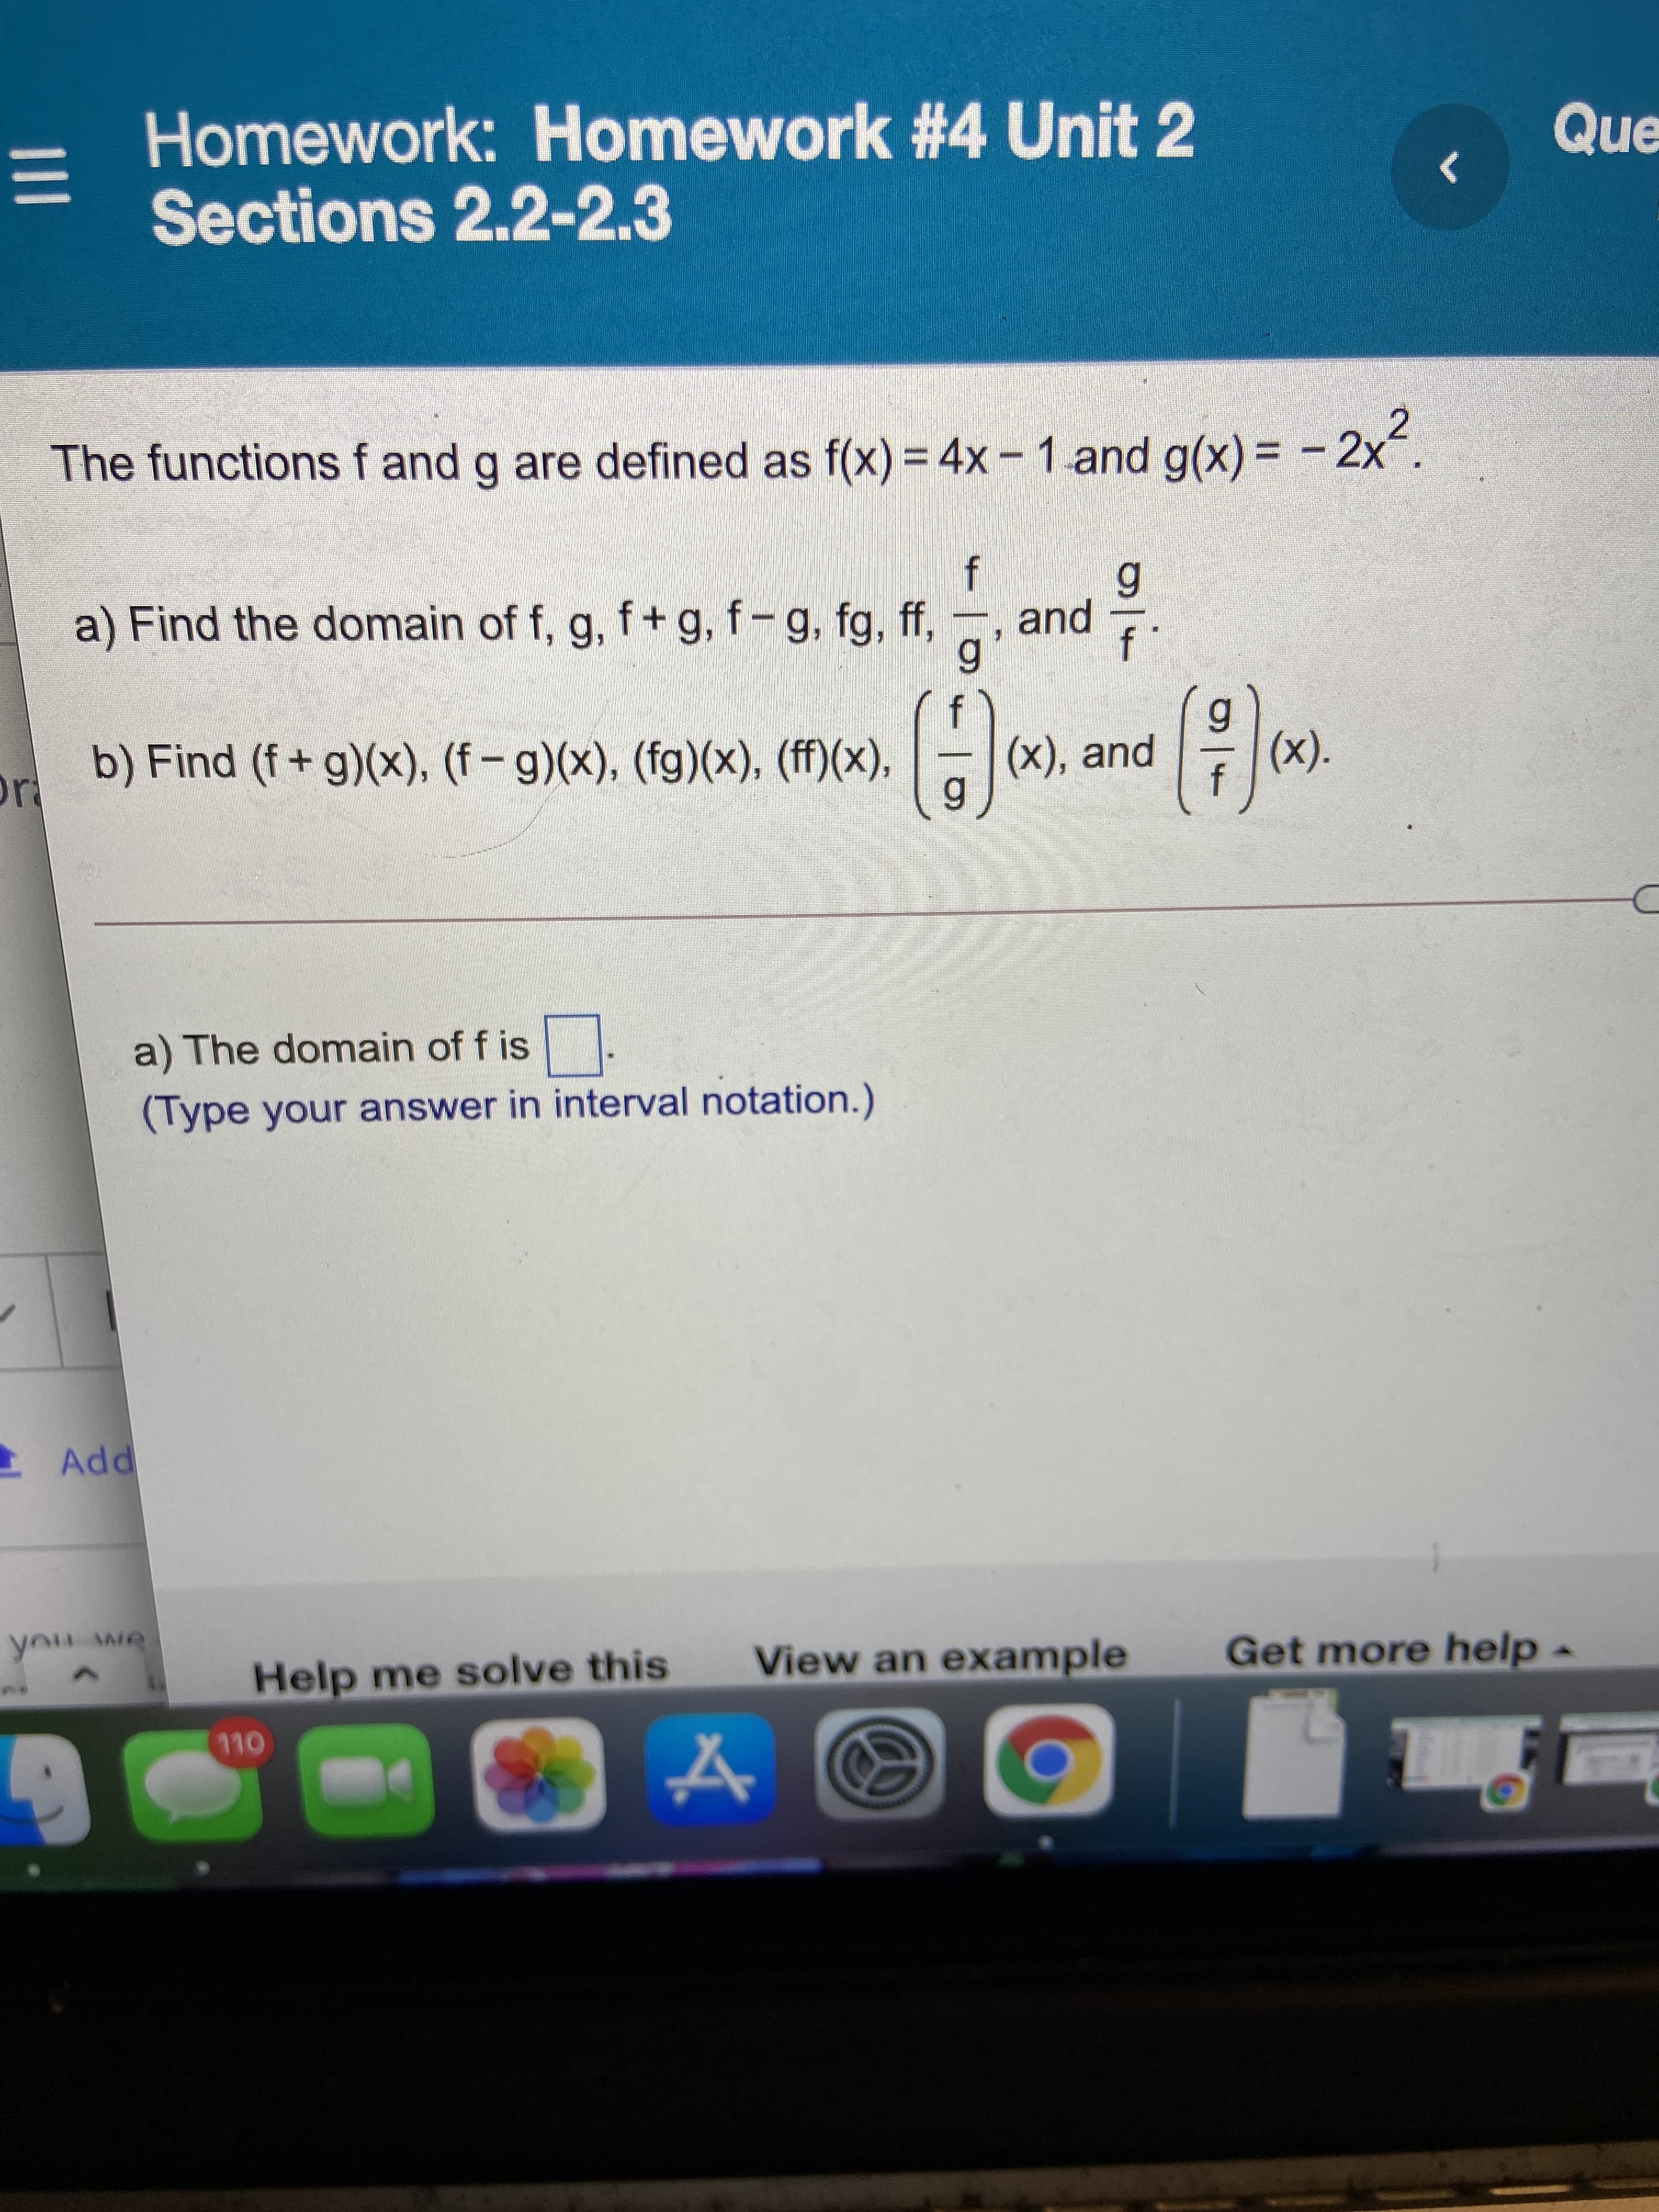 III
Homework: Homework #4 Unit 2
Sections 2.2-2.3
Que
The functions f and g are defined as f(x) = 4x- 1 and g(x) = - 2x.
%3D
%3D
a) Find the domain of f, g, f+ g, f-g, fg, ff, , and
b) Find (f+ g)(x), (f – g)(x), (fg)(x), (ff)(x),
(x), and
(x).
a) The domain of f is
(Type your answer in interval notation.)
Add
Help me solve this
View an example
Get more help-
OL
